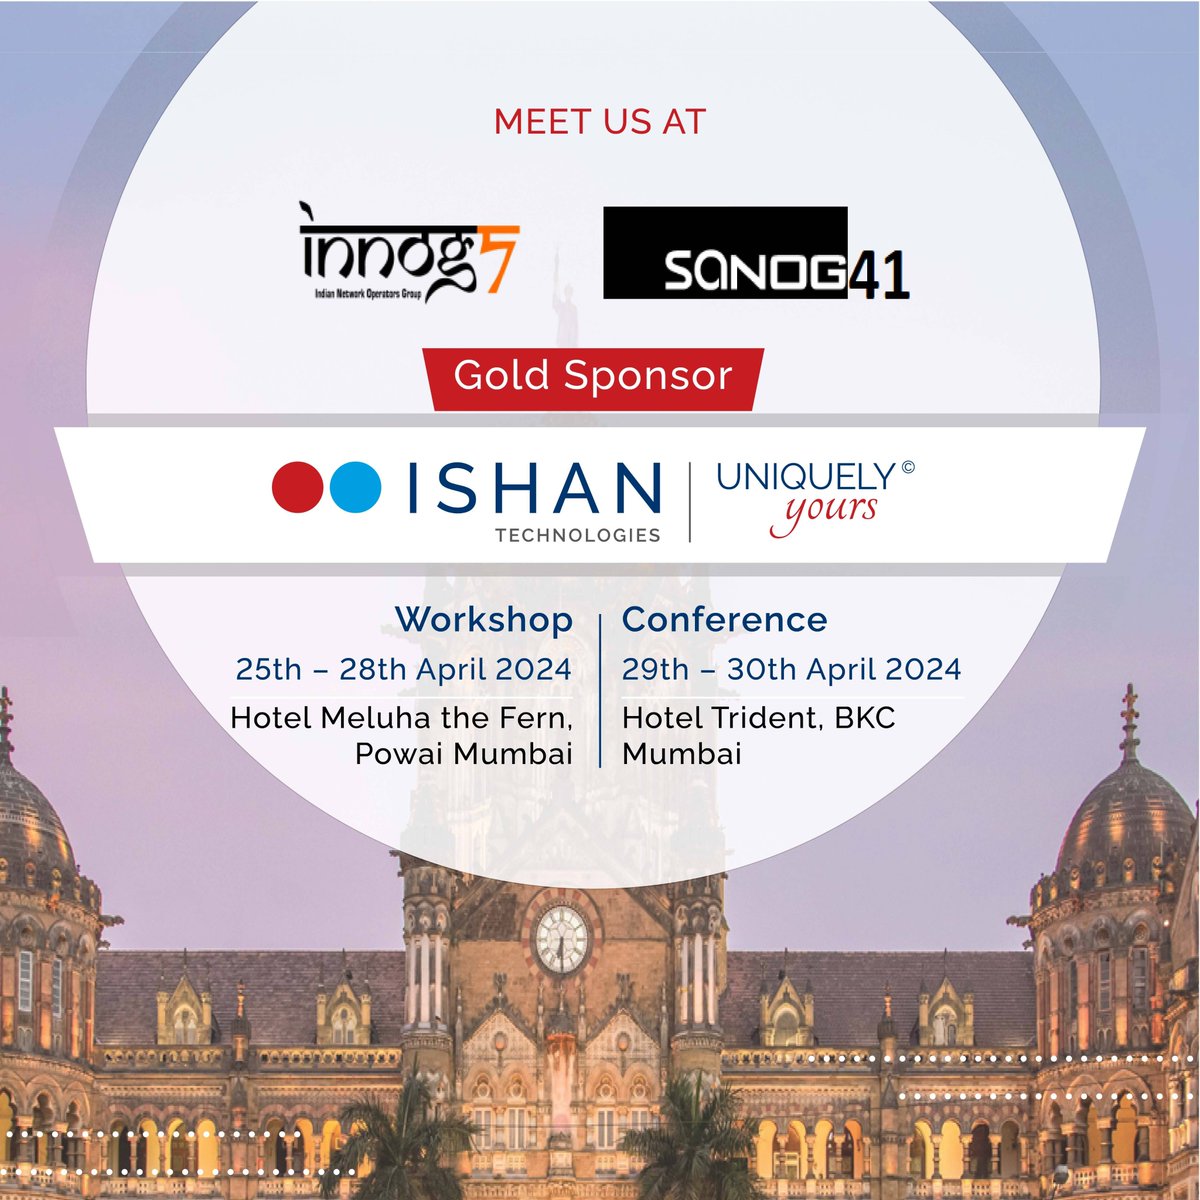 Join us tomorrow at Fern Mumbai for the INNOG7 and SANOG 41 Workshop & Conference! Learn, network, and innovate with industry experts.

#ishantechnologies #ishanism #innog7 #sanog41 #DigitalTransformation #INTERNET #technologies